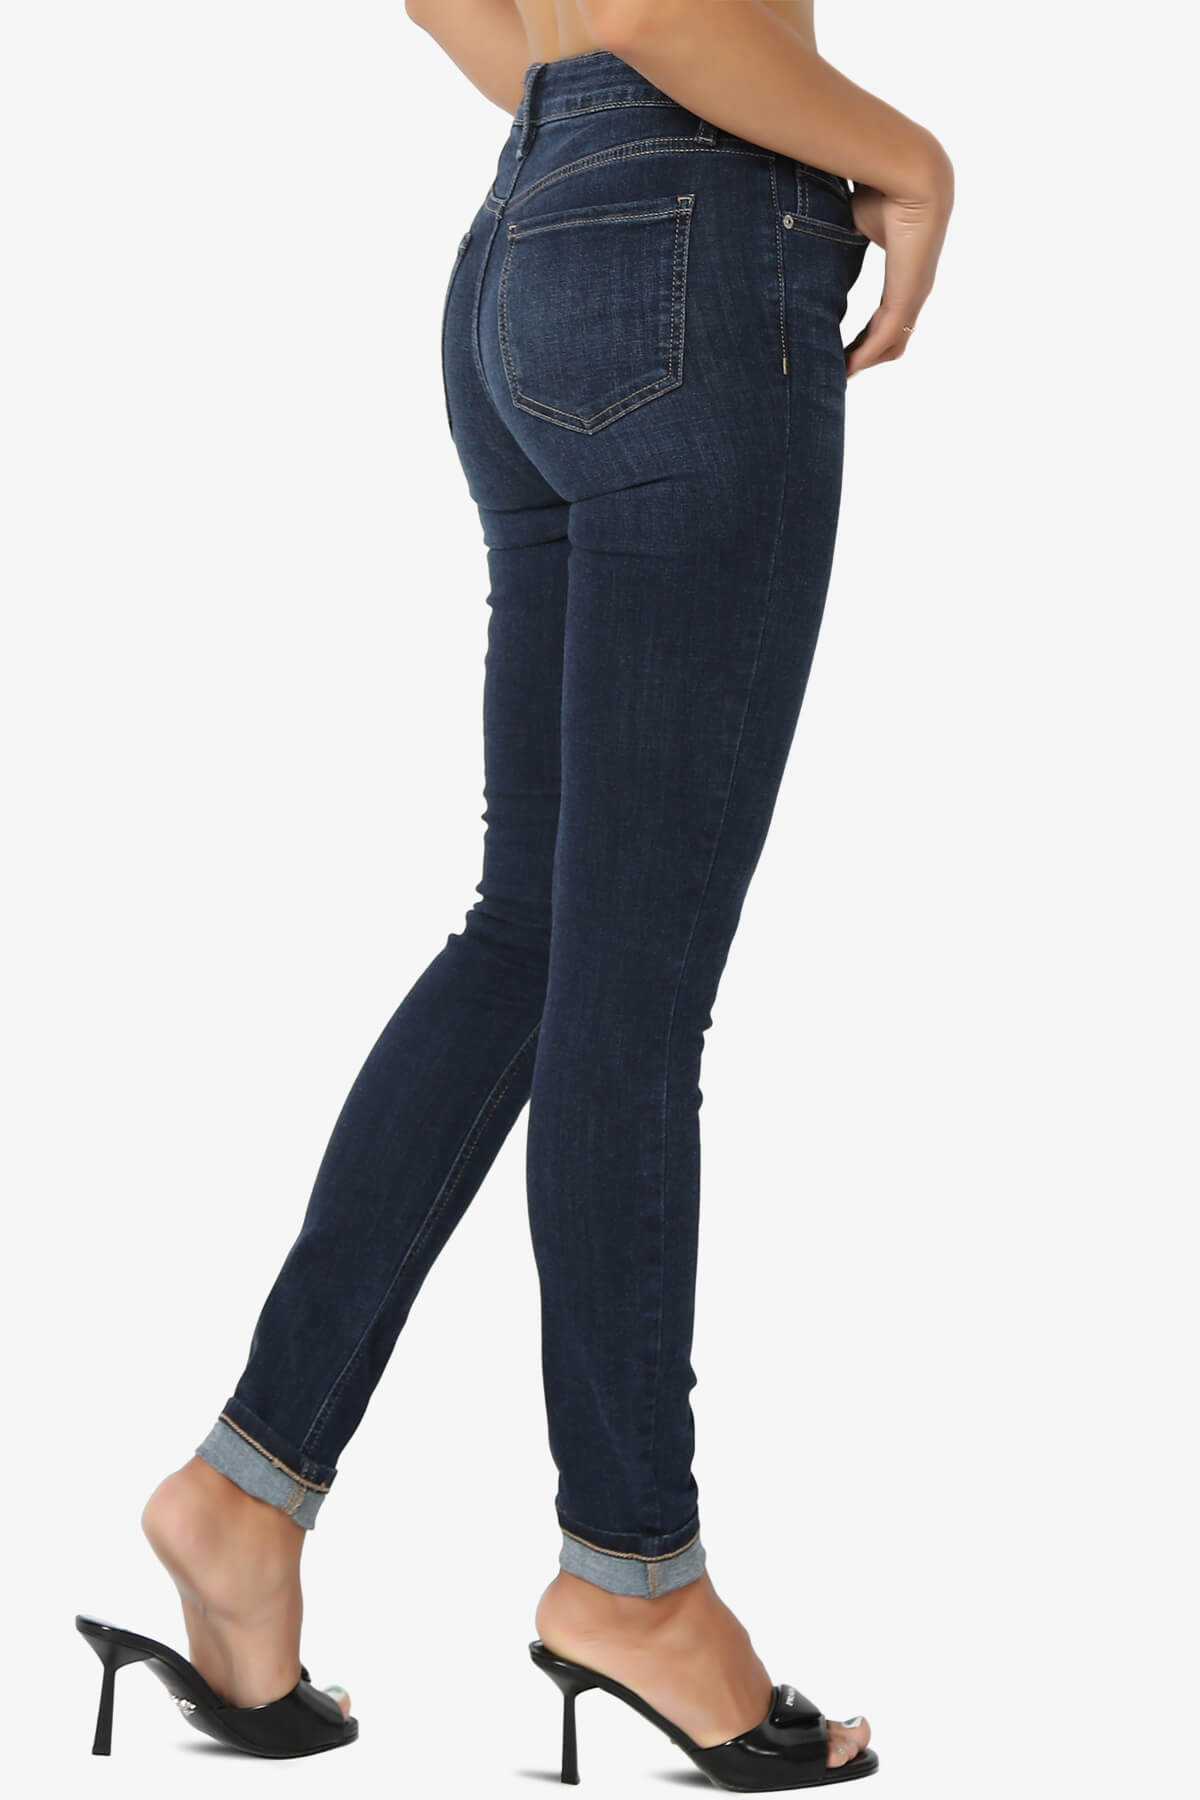 Jude Mid Rise Ankle Skinny Jeans in Bseat DARK_4